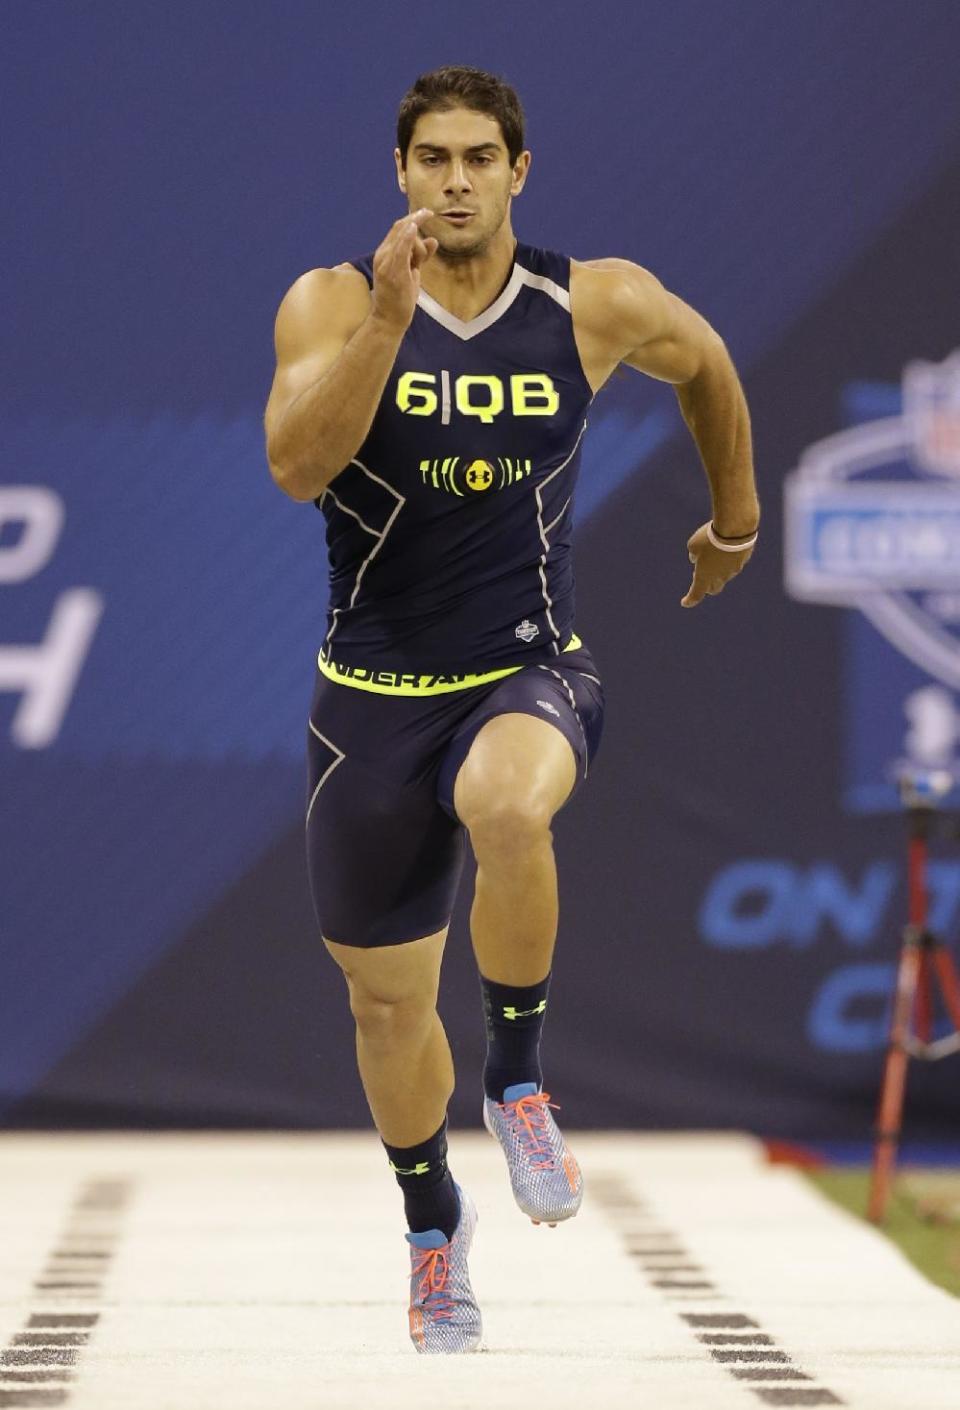 Eastern Illinois quarterback Jimmy Garoppolo runs a drill at the NFL football scouting combine in Indianapolis, Sunday, Feb. 23, 2014. (AP Photo/Nam Y. Huh)